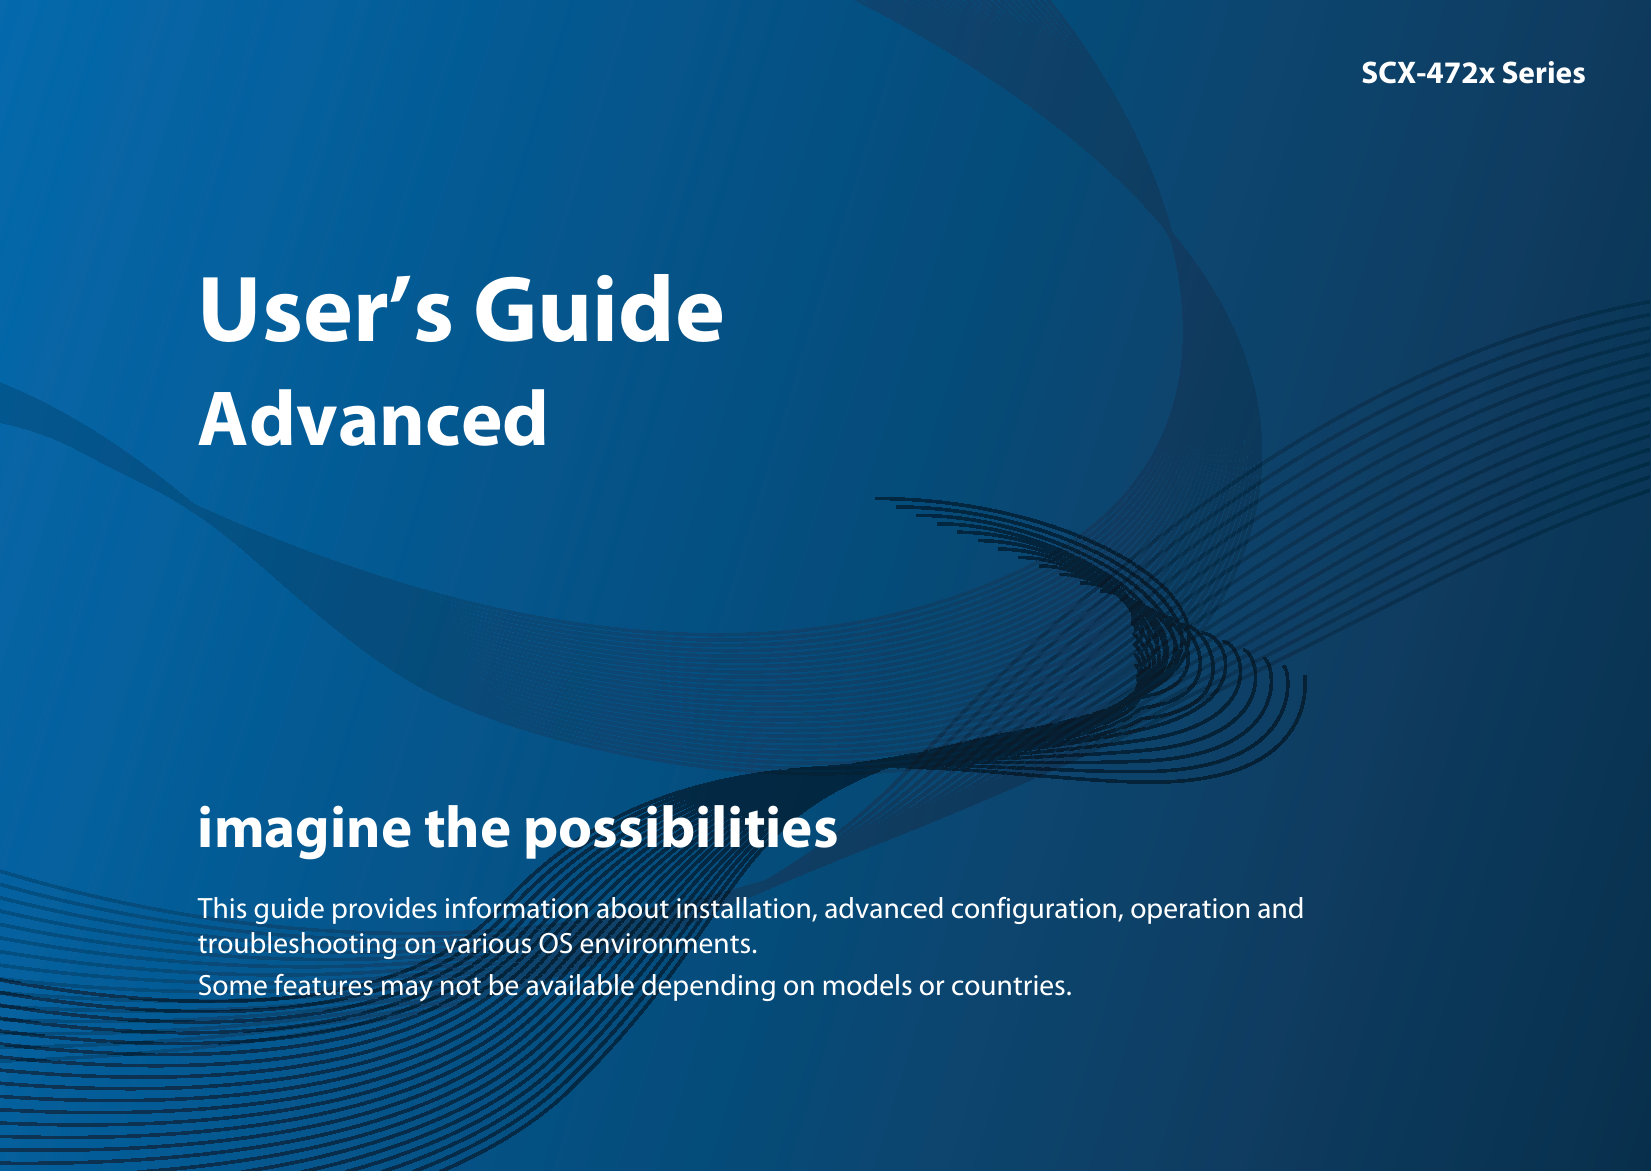 SCX-472x SeriesUser’s GuideAdvancedimagine the possibilitiesThis guide provides information about installation, advanced configuration, operation and troubleshooting on various OS environments. Some features may not be available depending on models or countries.